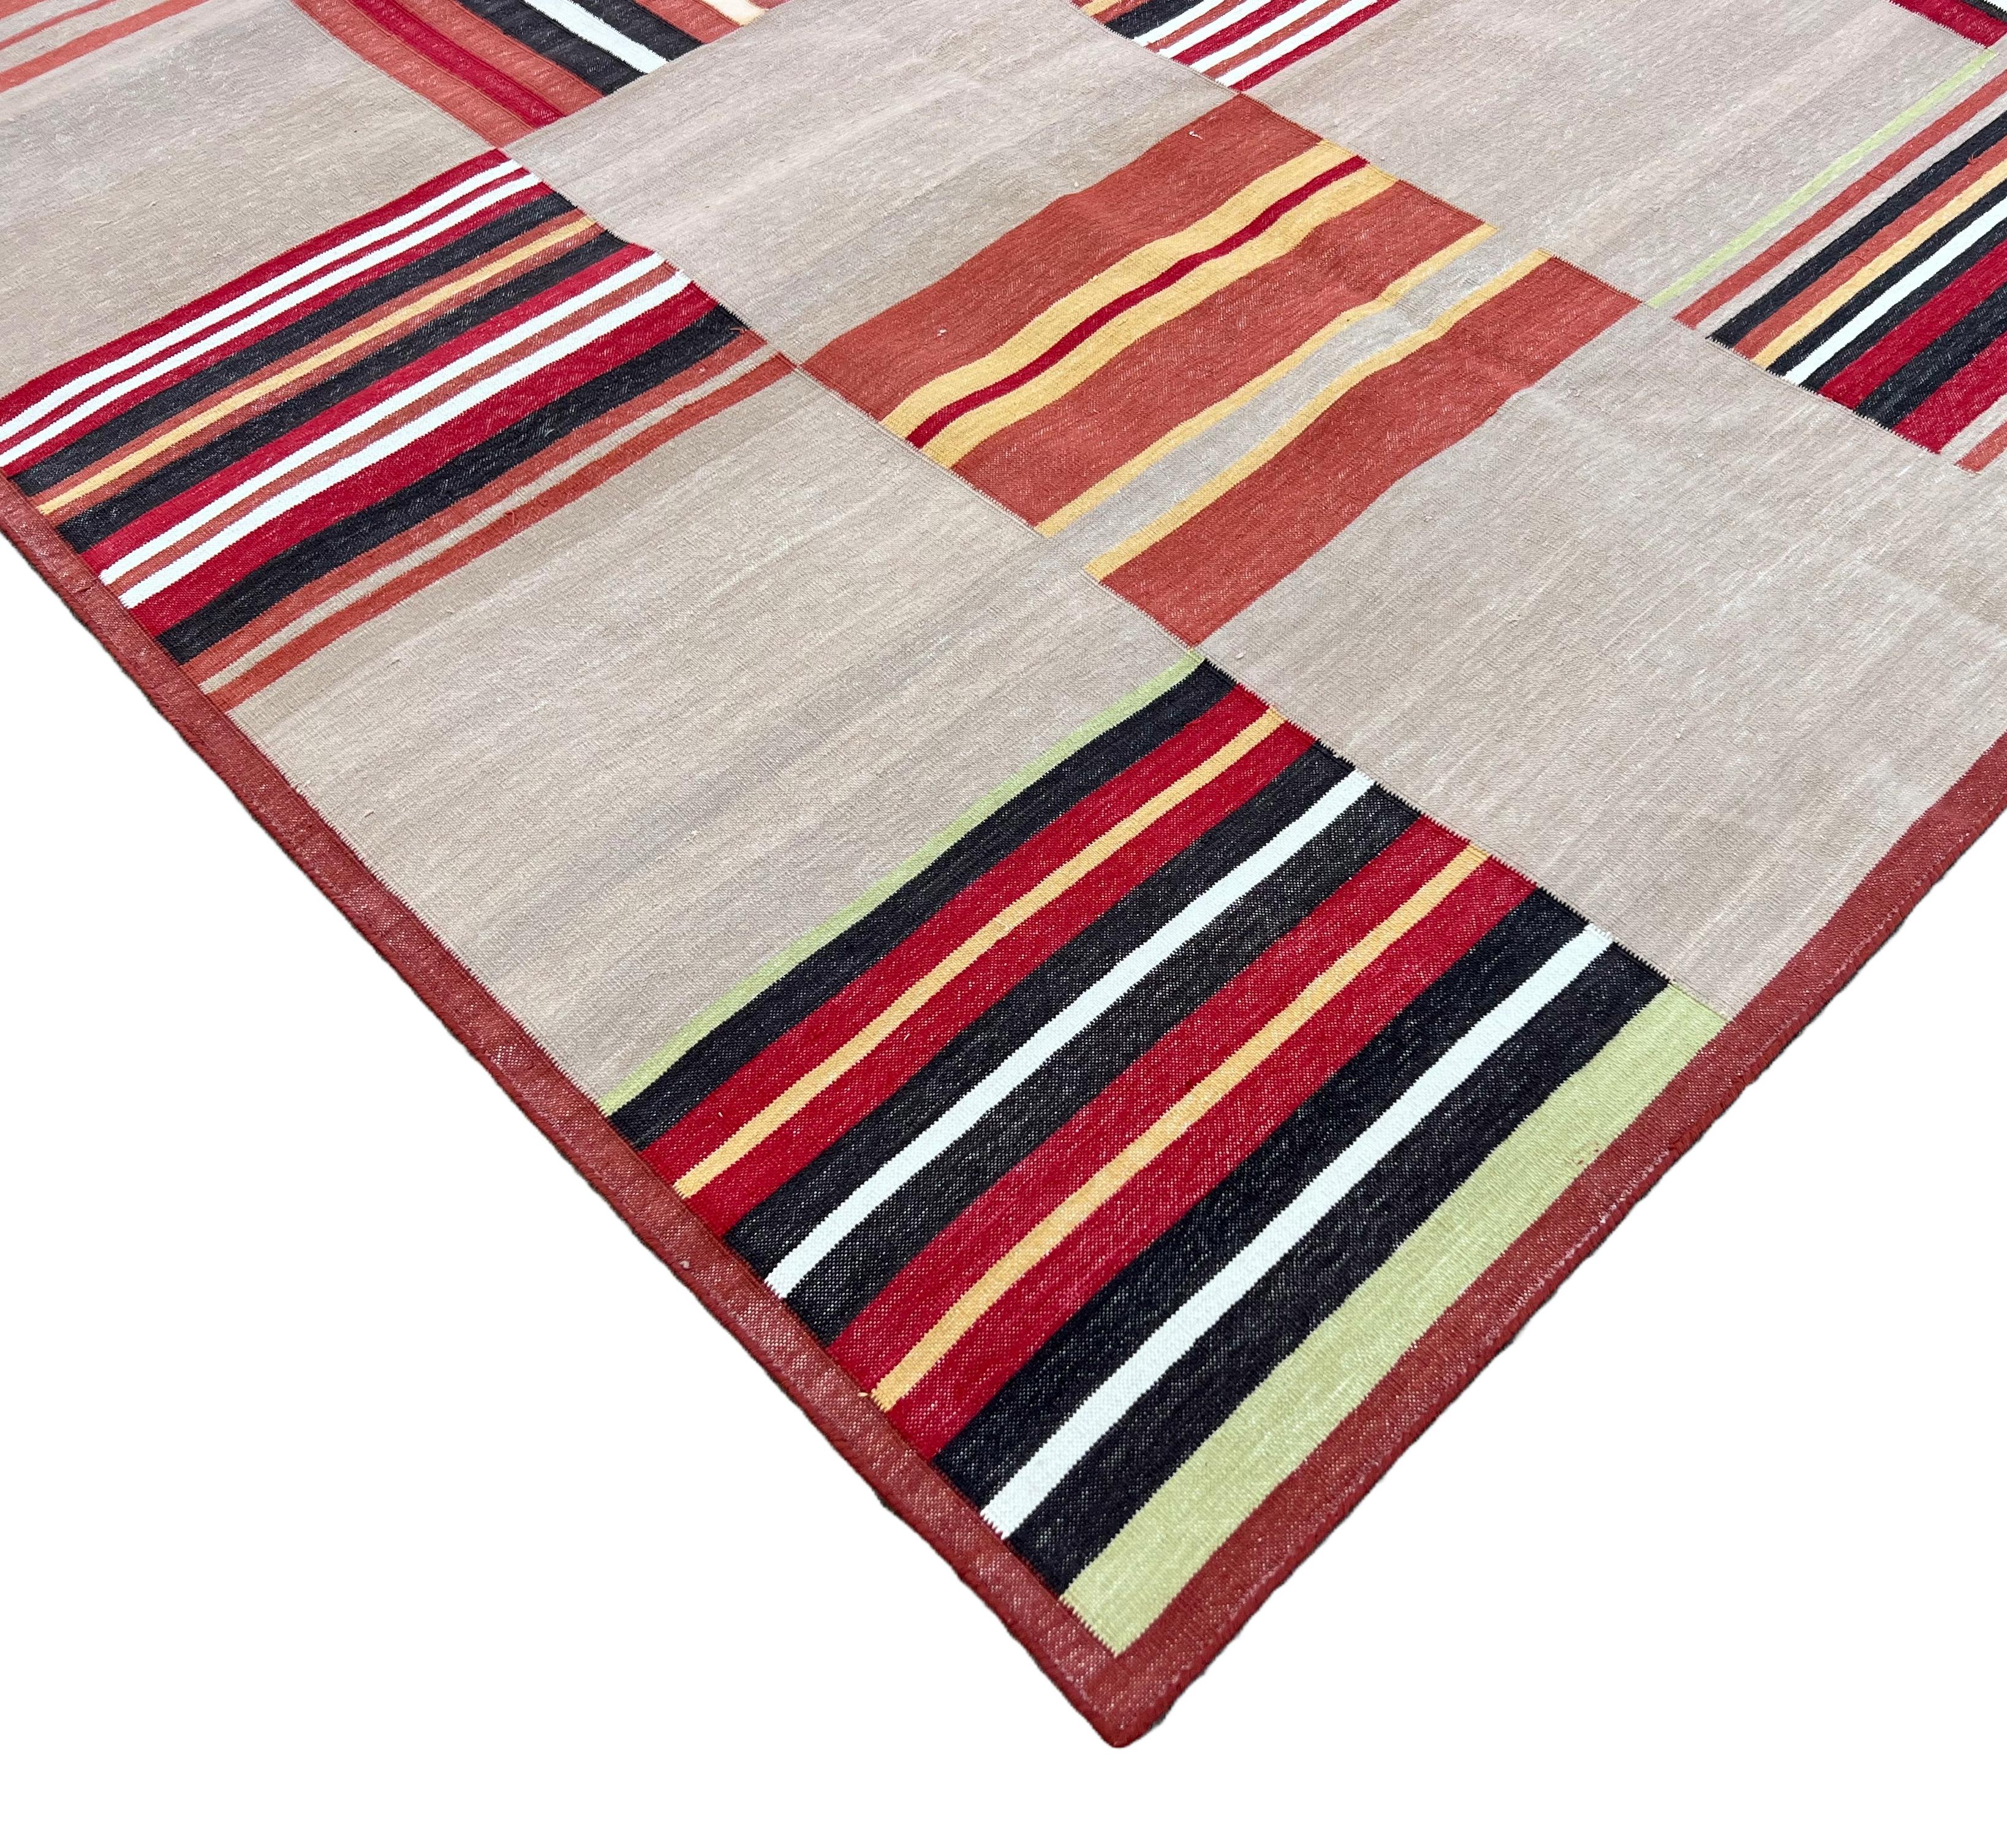 Indian Handmade Cotton Area Flat Weave Rug, Beige & Terracotta Red Tile Pattern Dhurrie For Sale